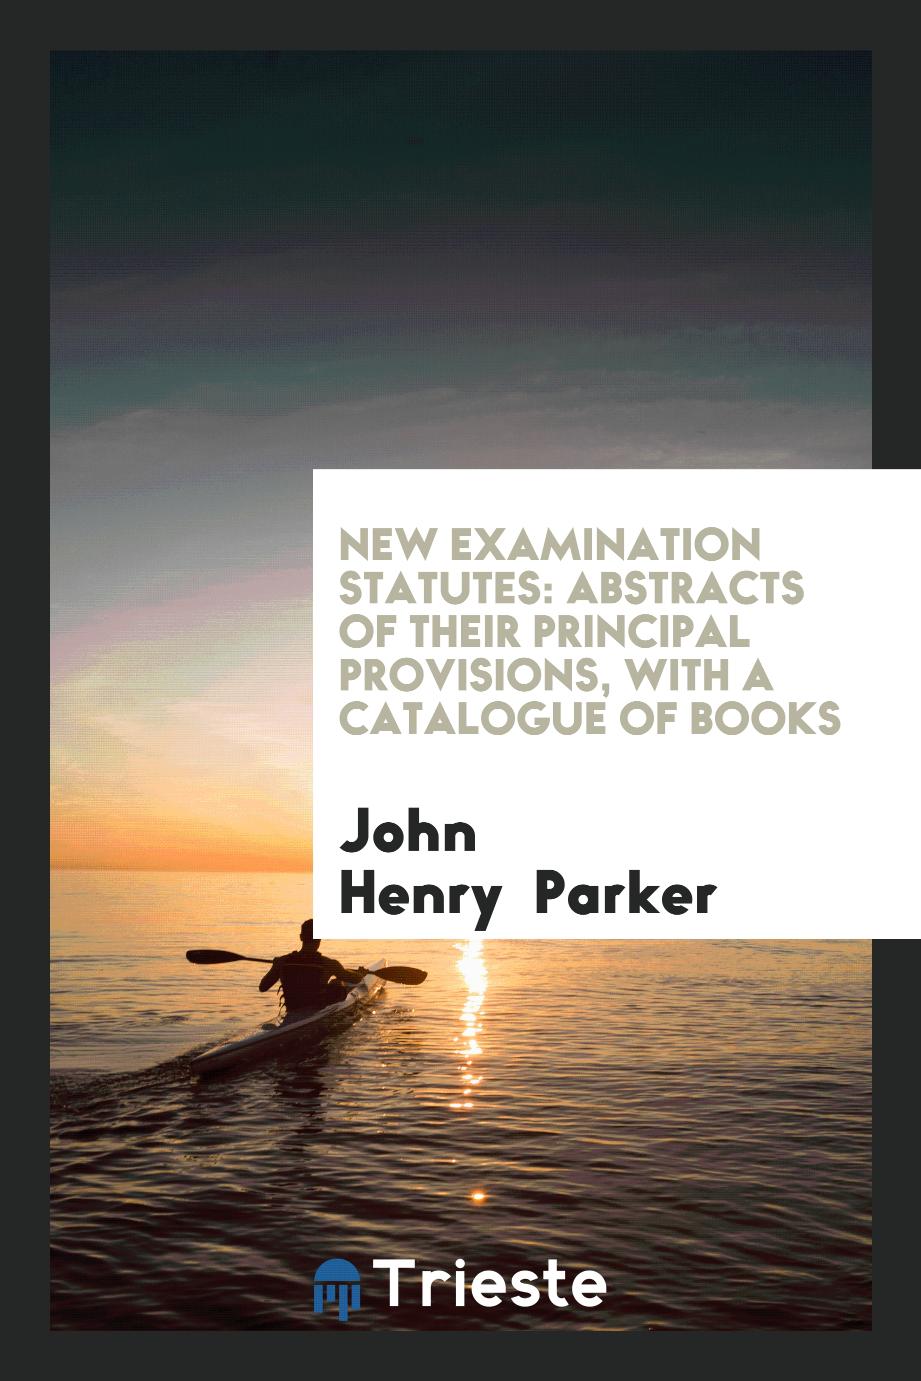 New Examination Statutes: Abstracts of Their Principal Provisions, with a catalogue of books